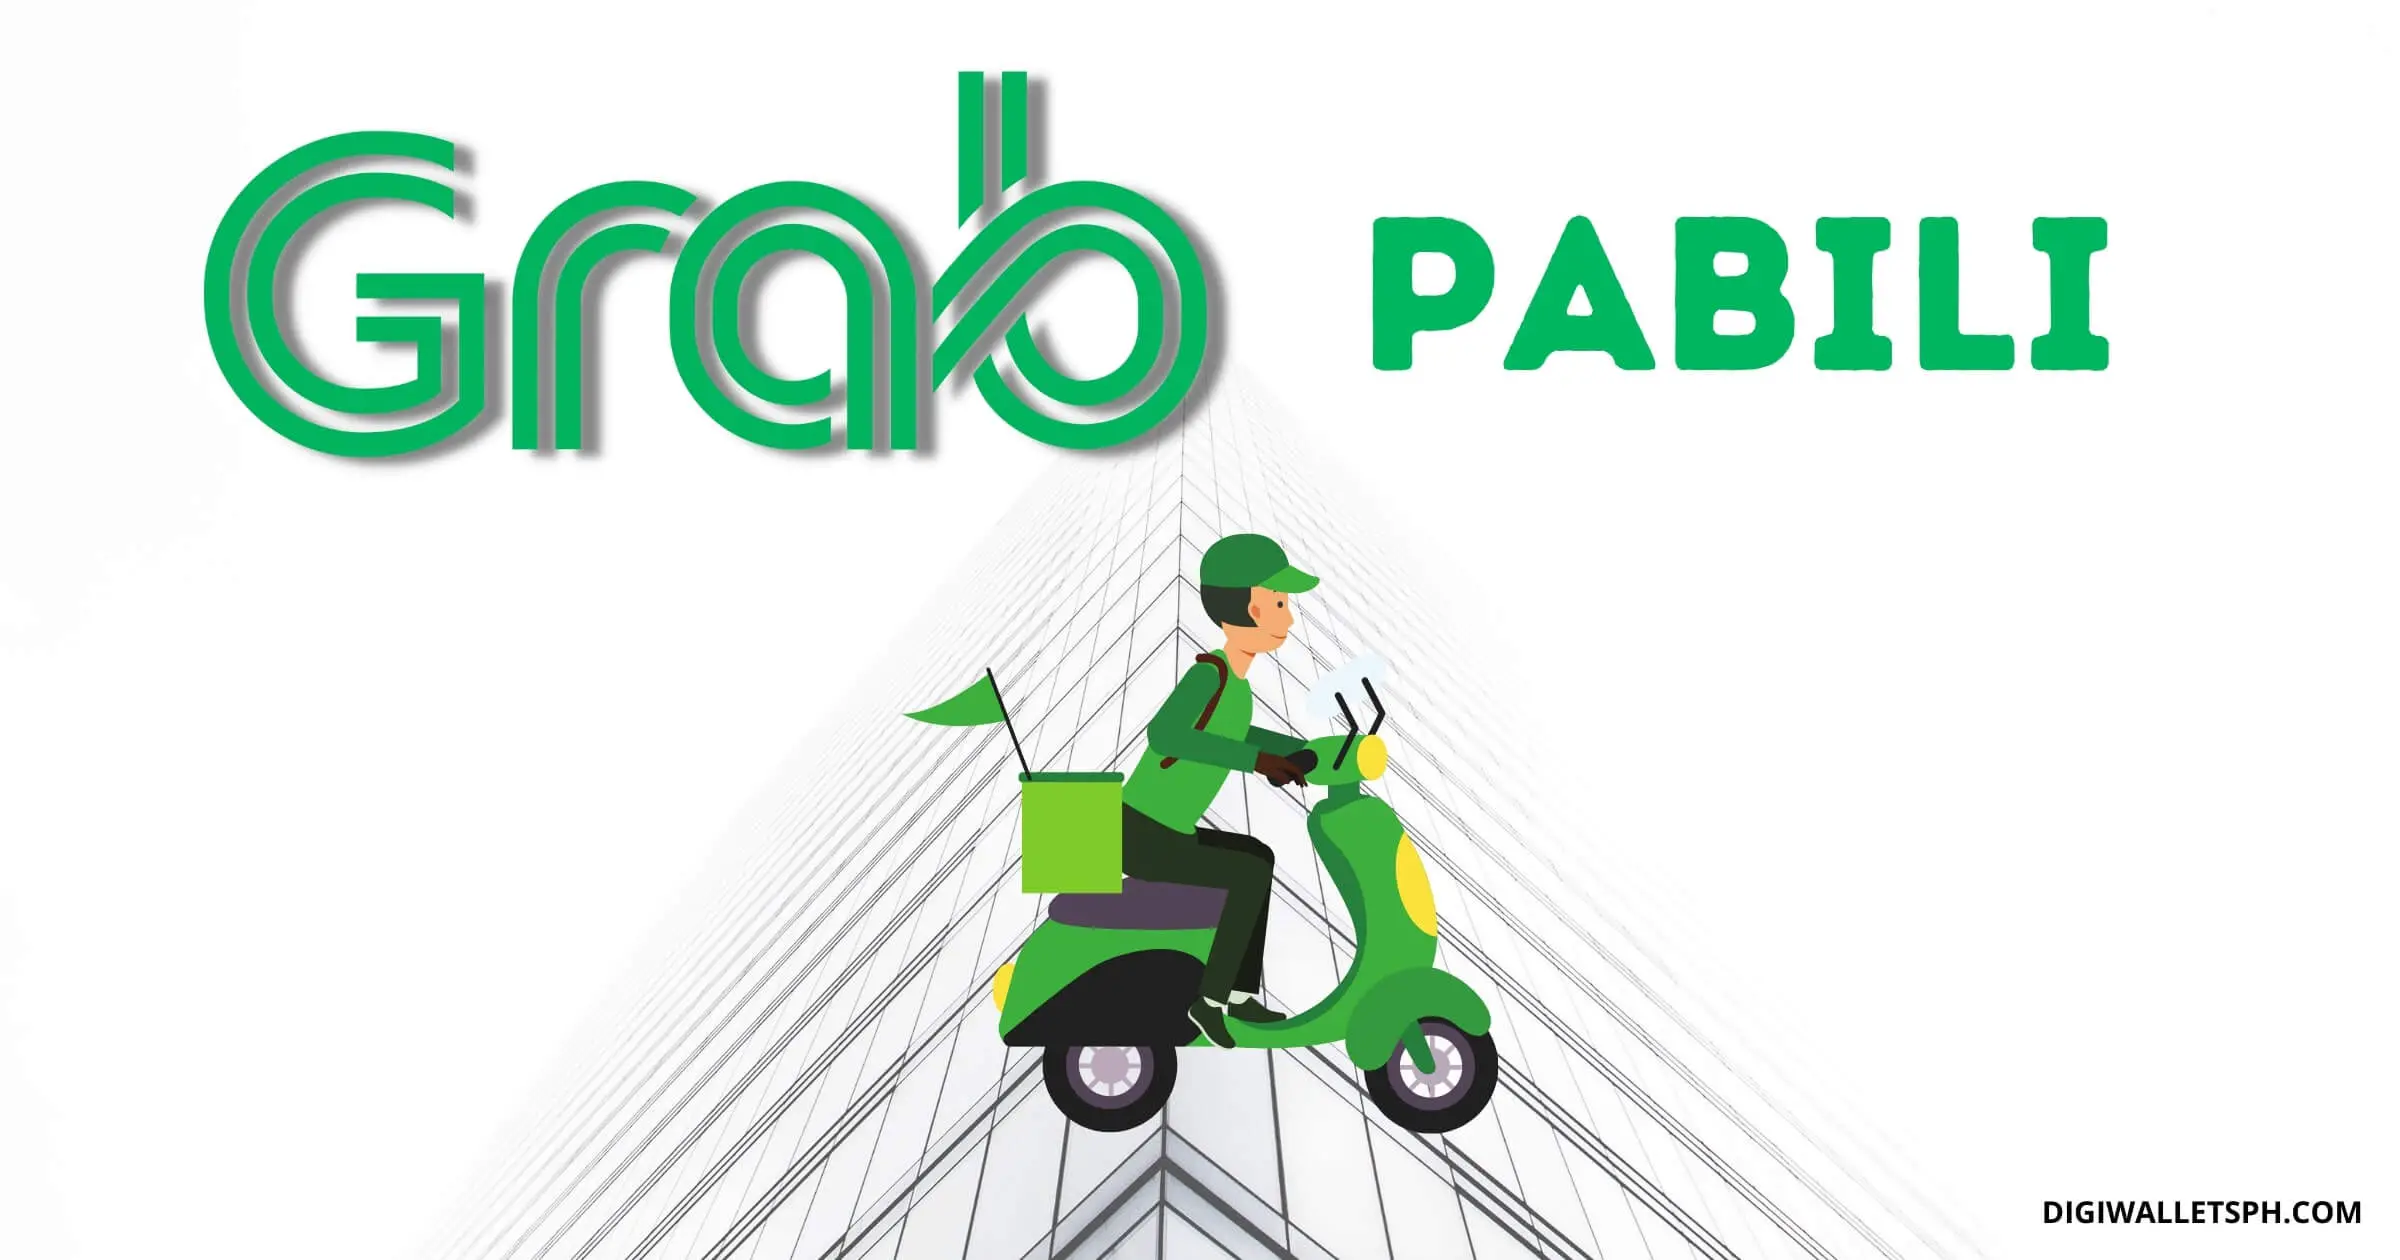 How to use Grab pabili